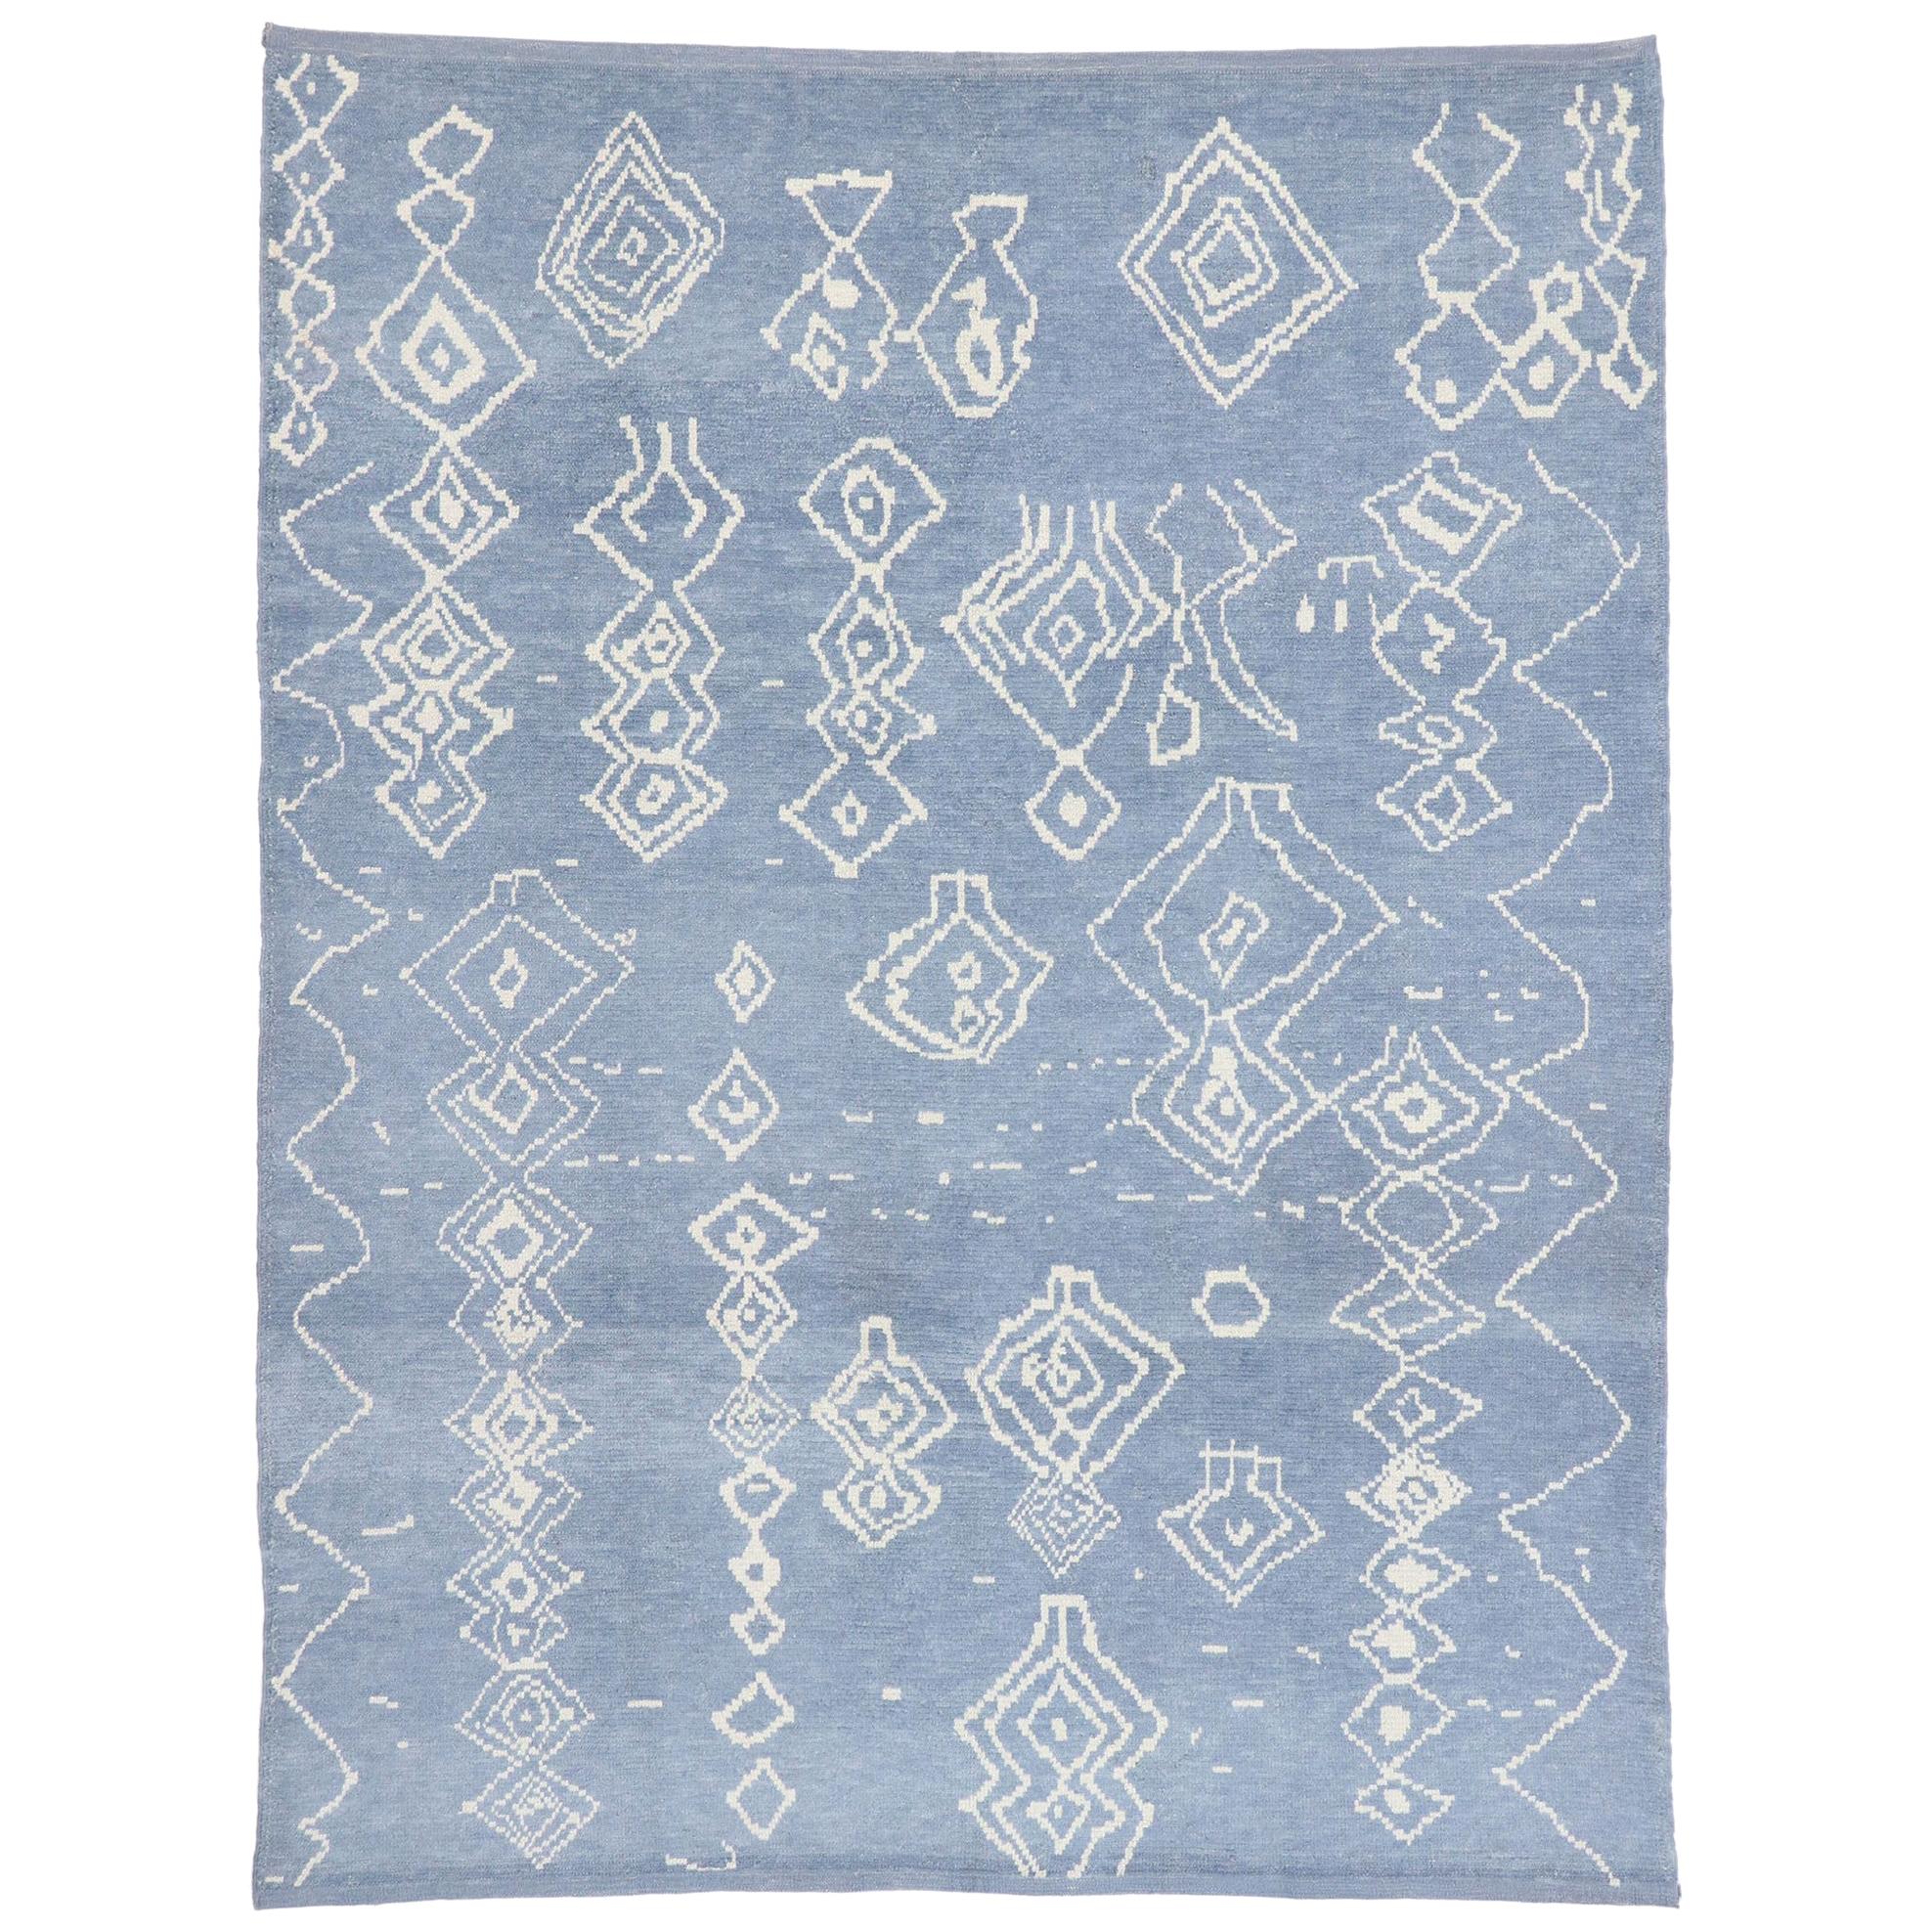 New Contemporary Sky Blue Moroccan Style Rug with Modern Tribal Design